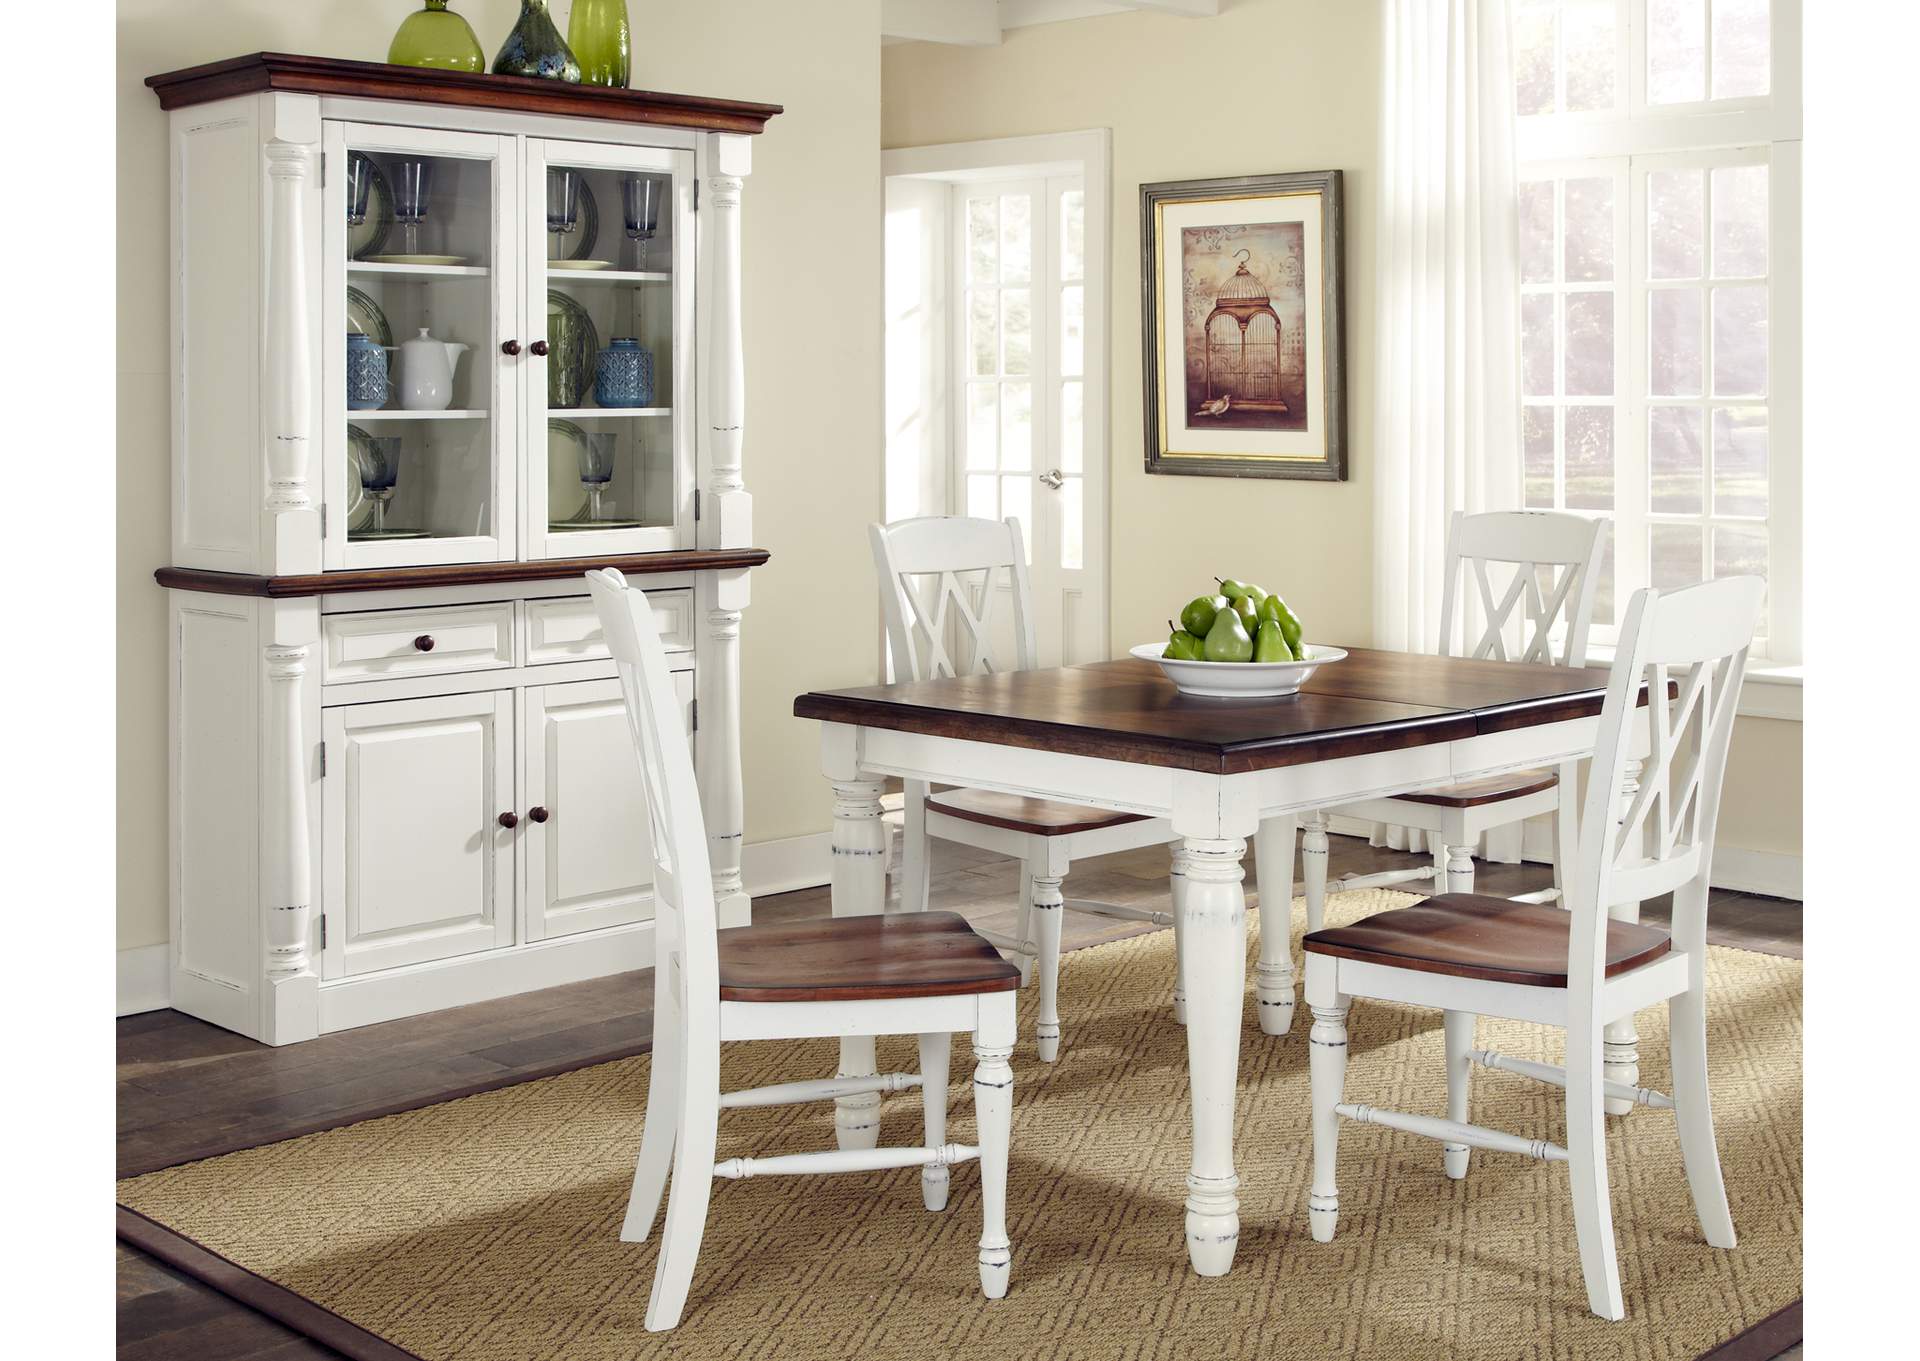 Monarch Off-White 5 Piece Dining Set,Homestyles